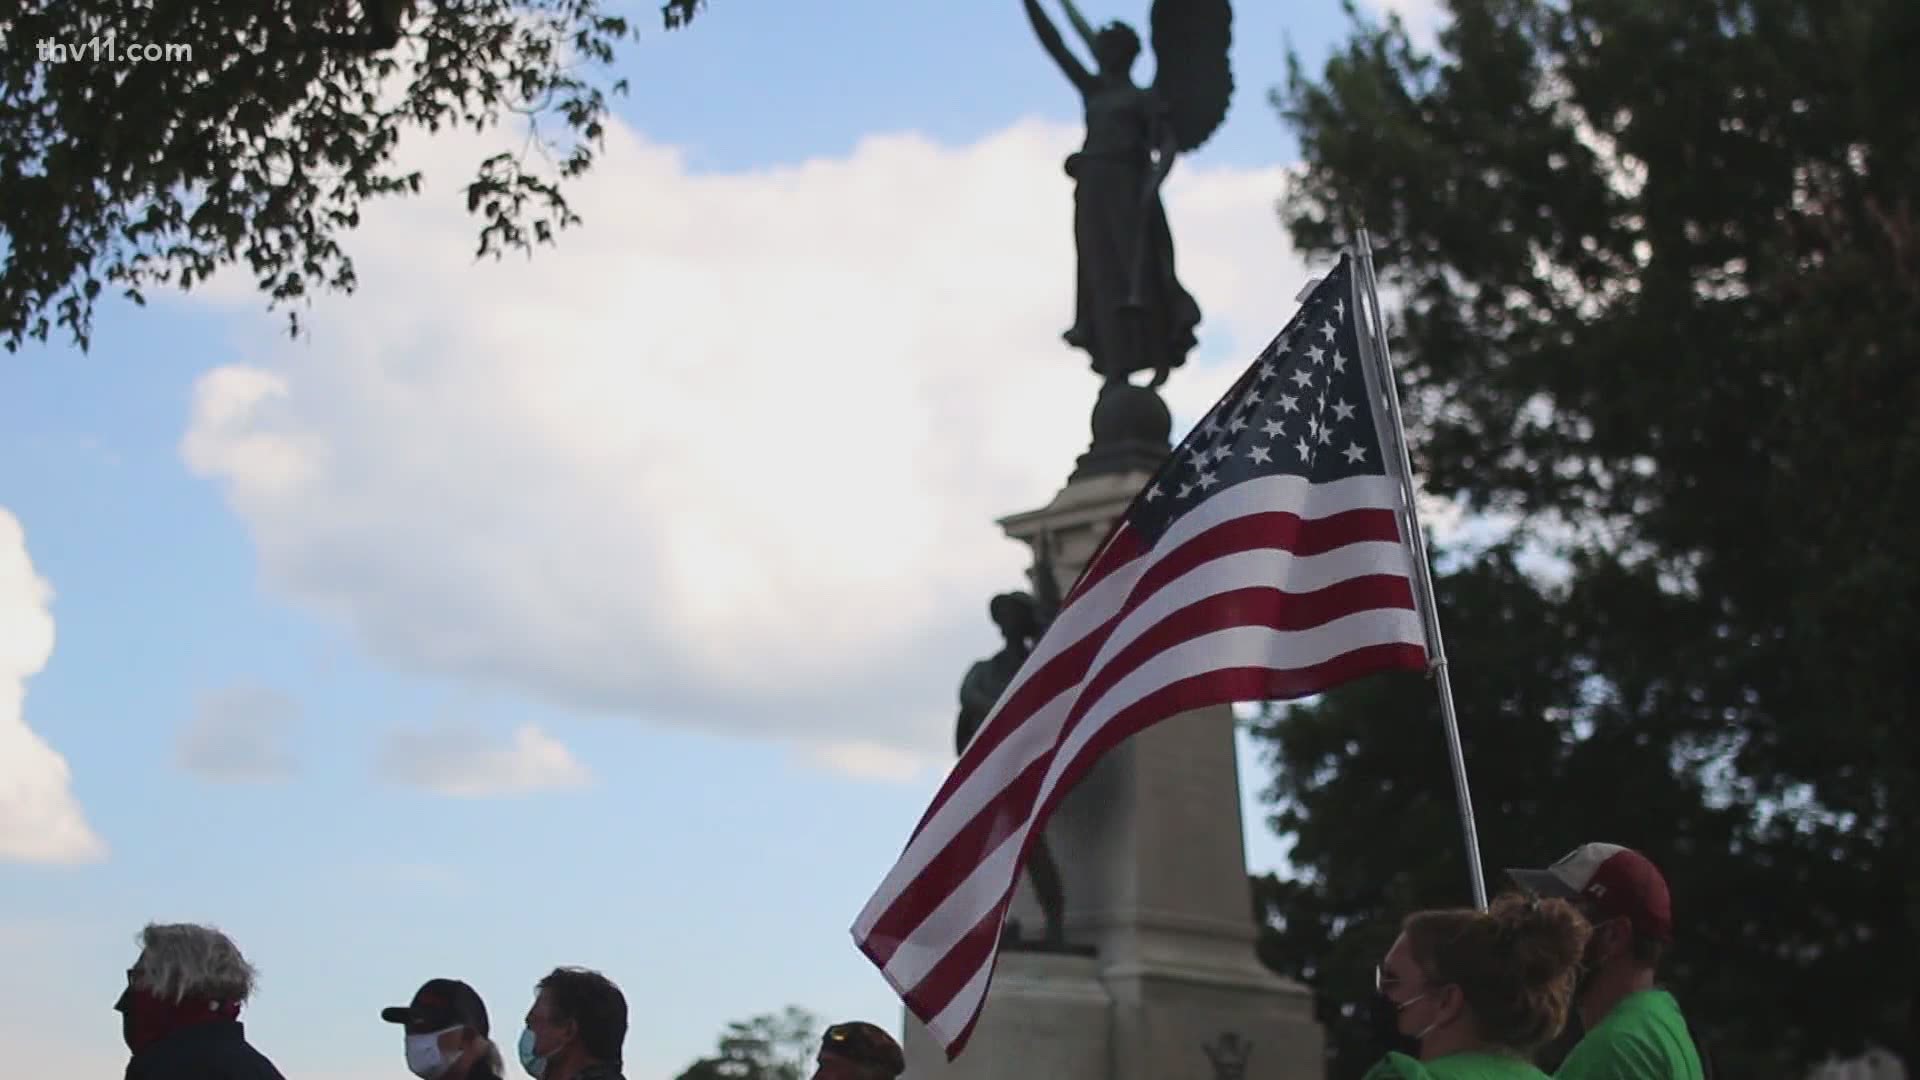 After calls on social media to take down the Confederate statue, dozens show up to protect it.